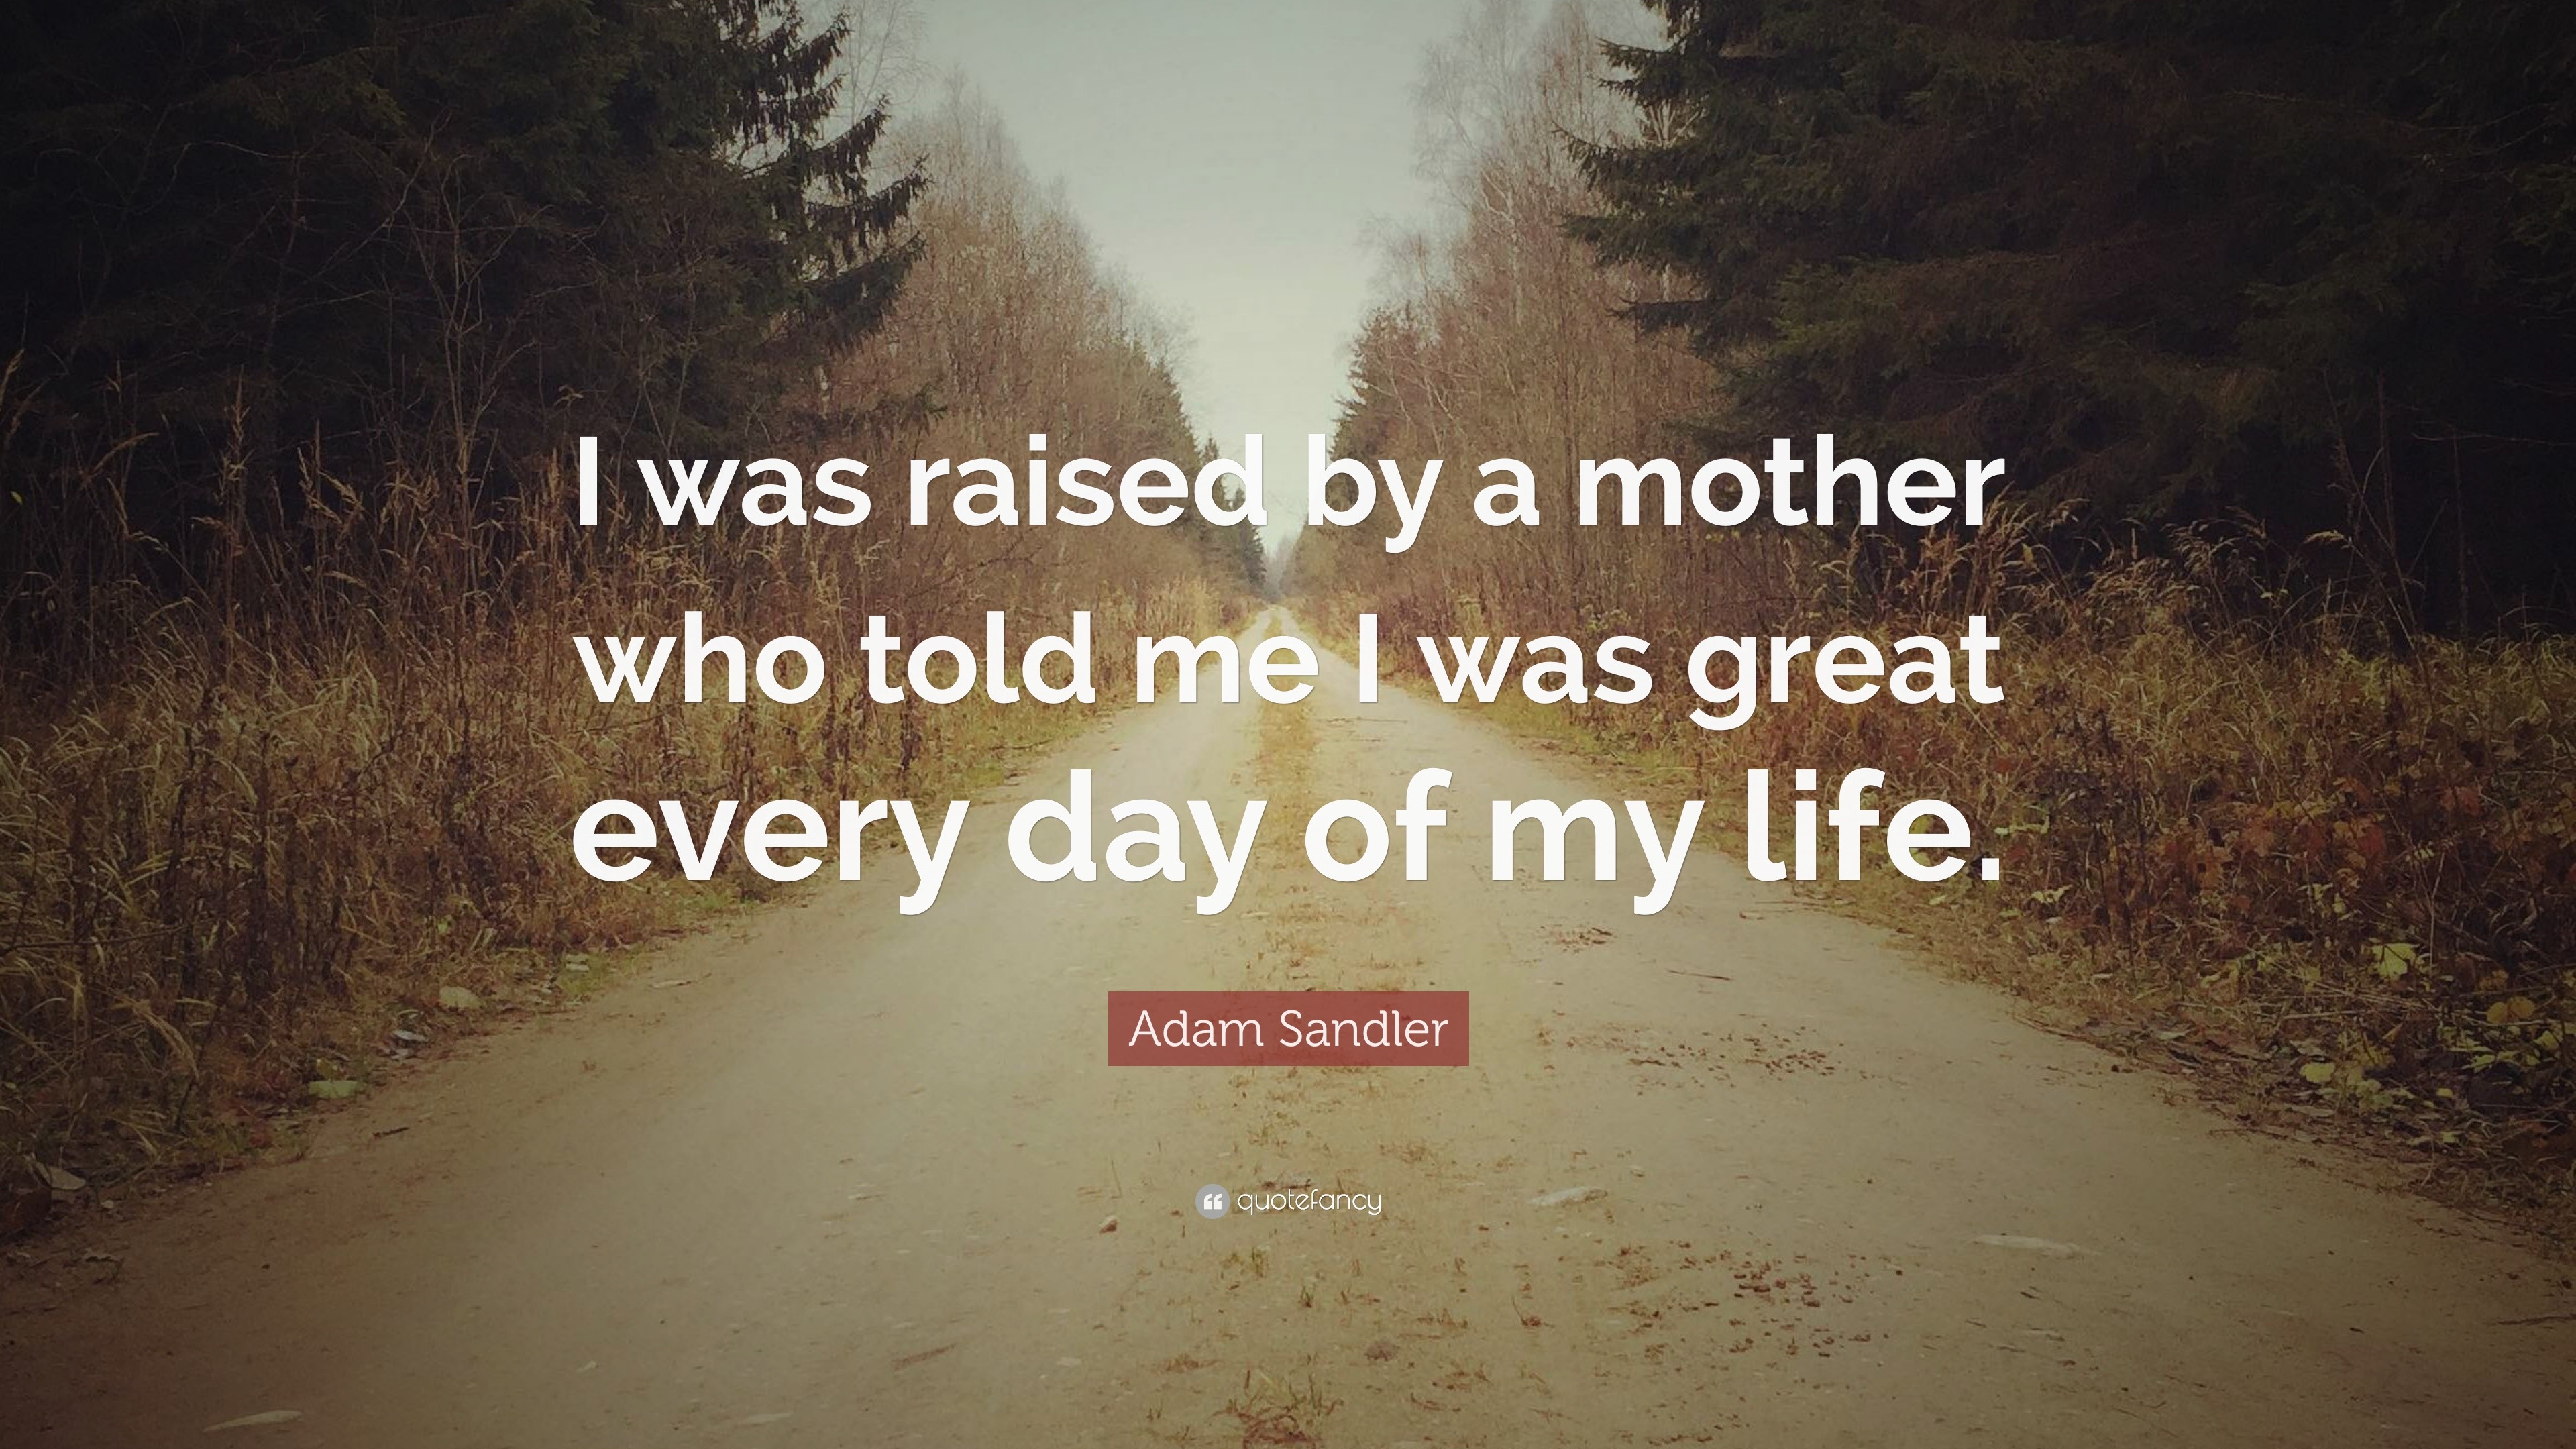 Adam Sandler Quote “i Was Raised By A Mother Who Told Me I Was Great Every Day Of My Life ”